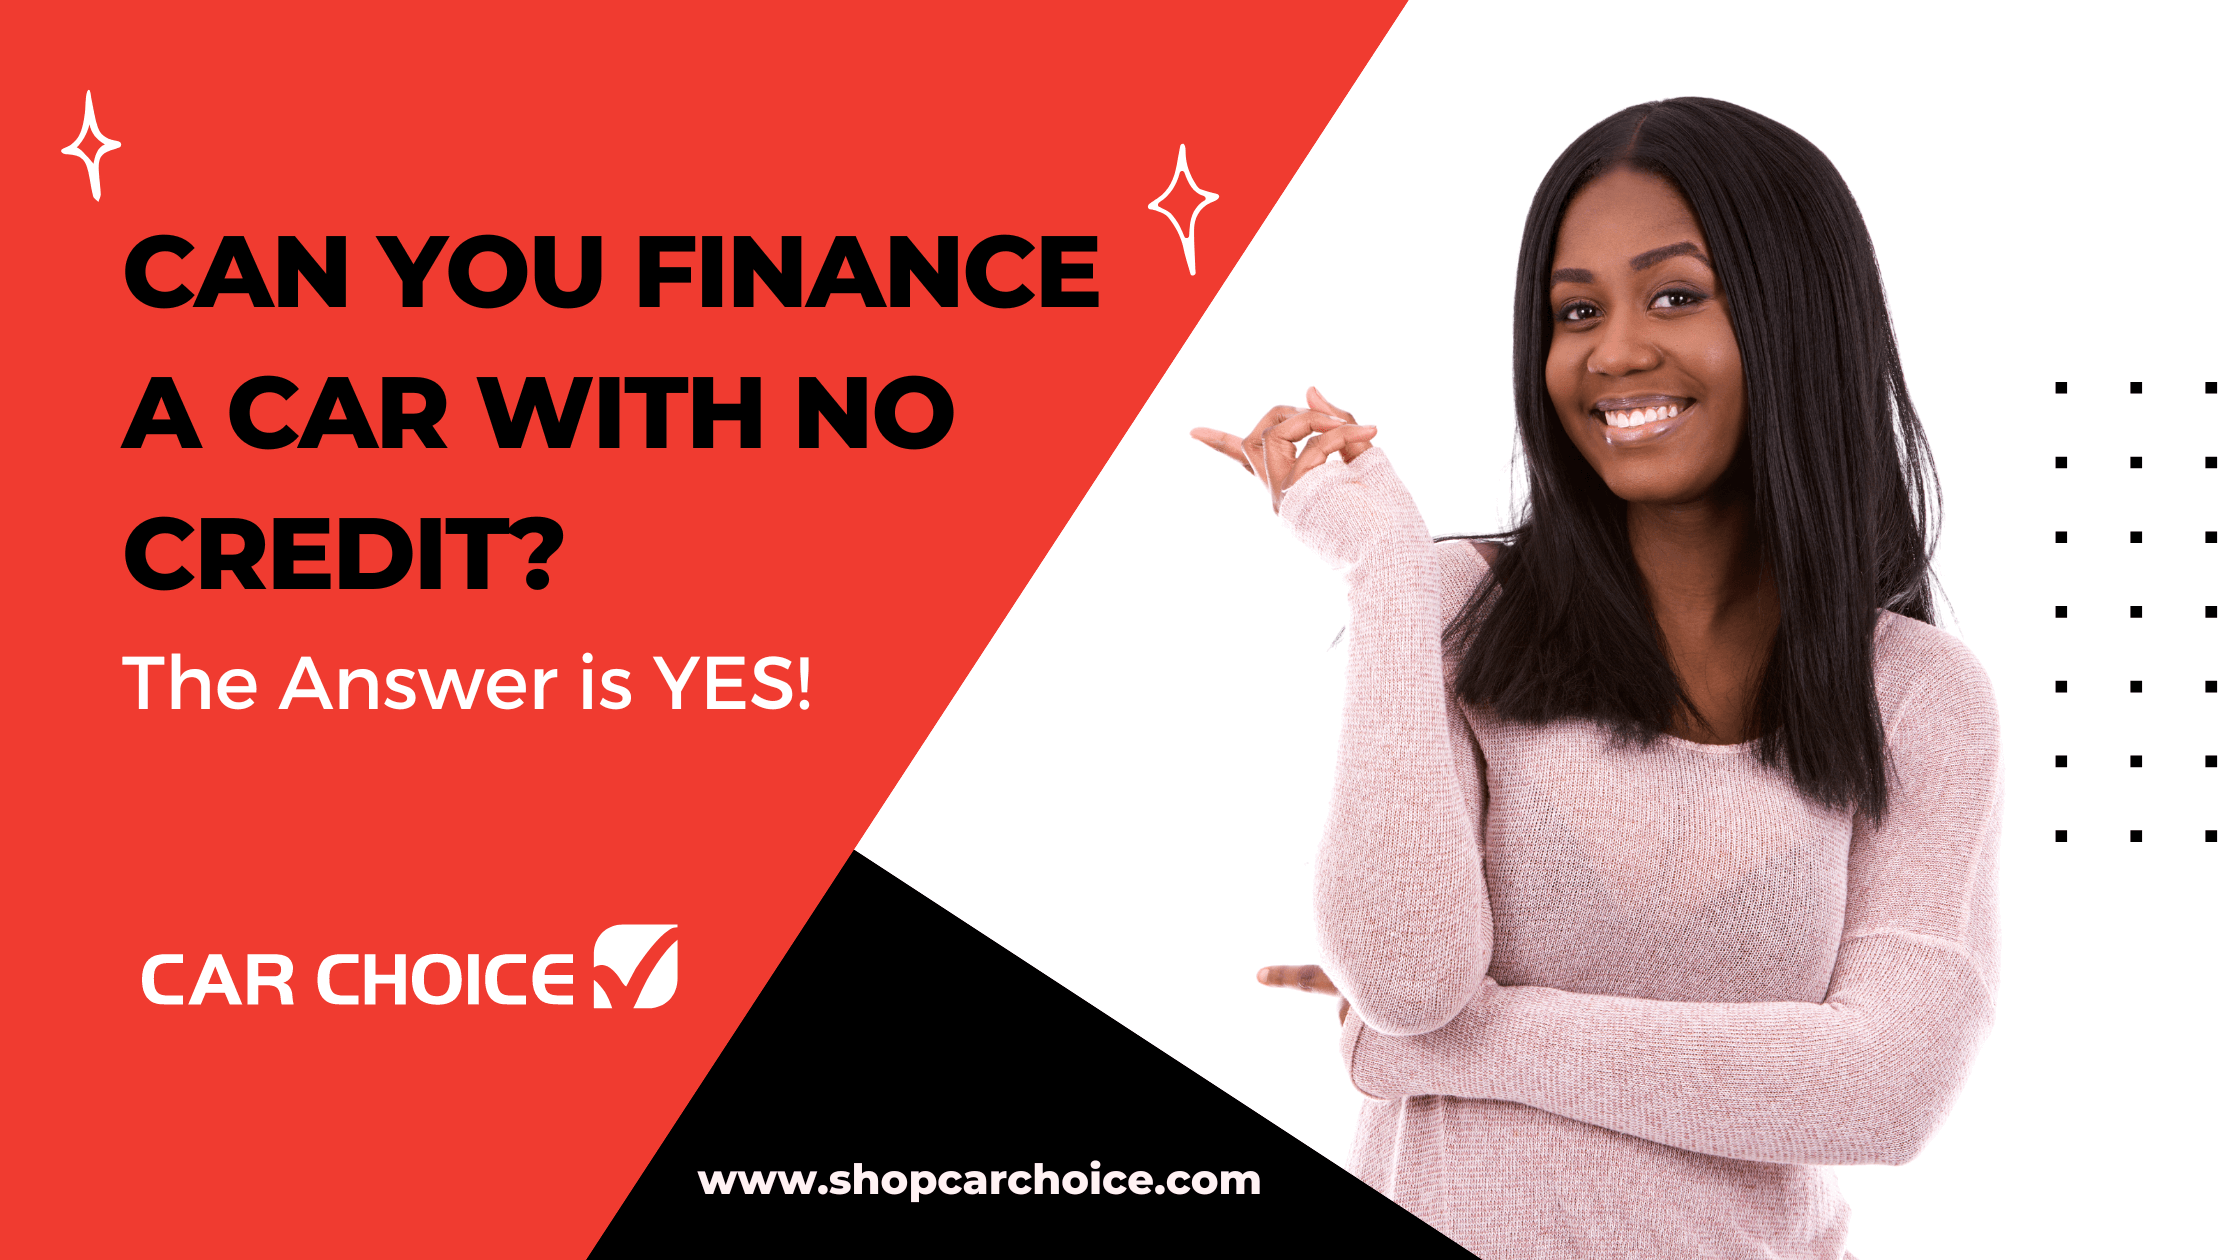 Can You Finance a Car with No Credit? YES!